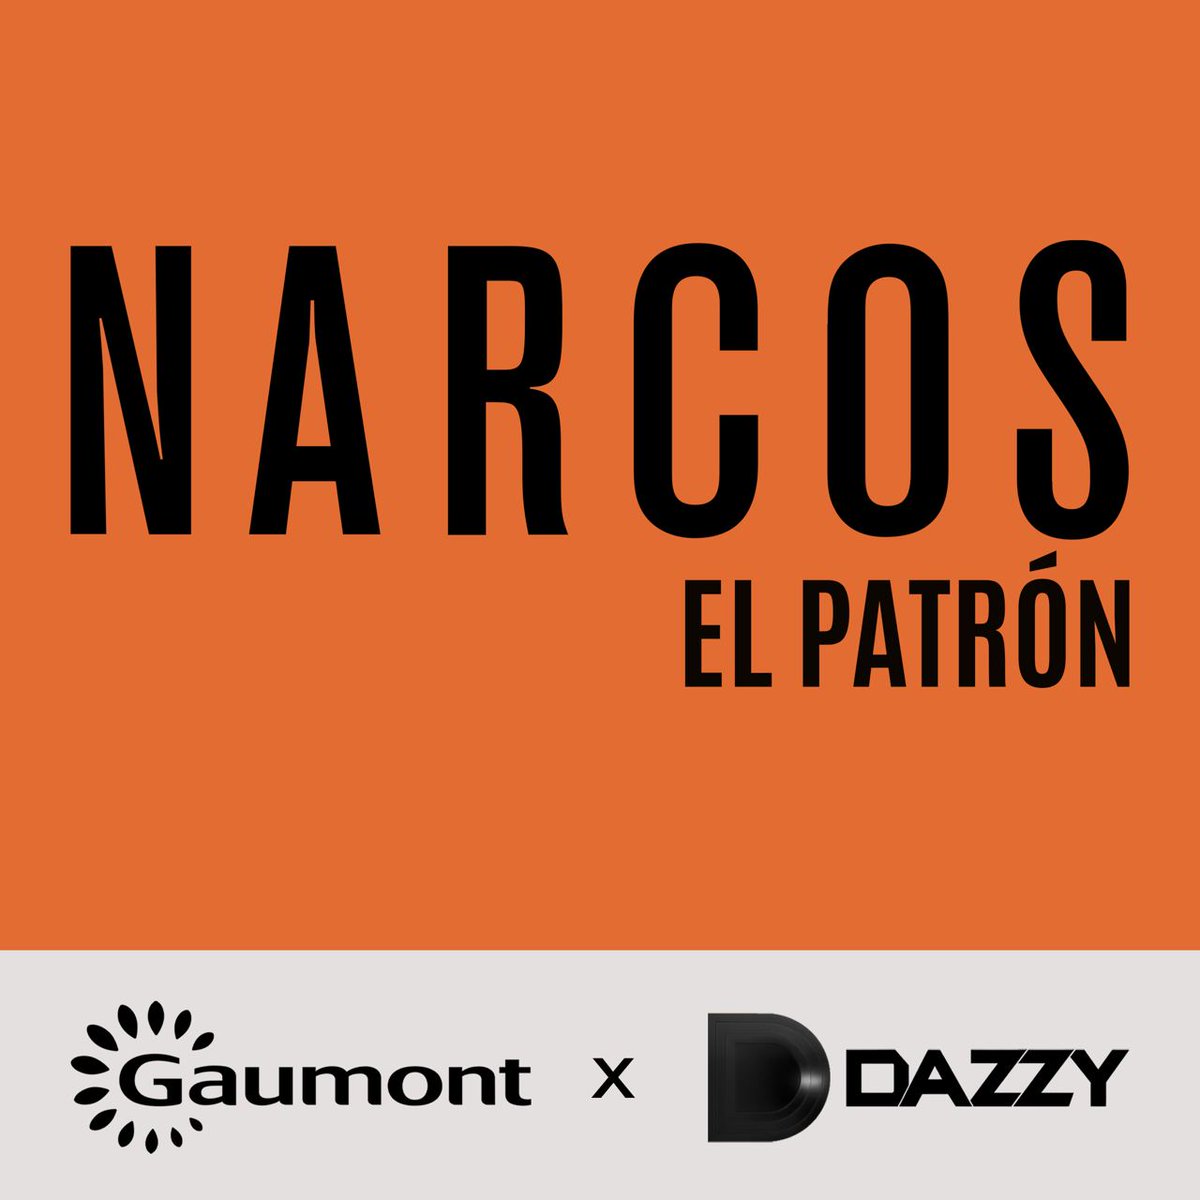 Bringing 'Narcos' to #Bitcoin ordinals isn't just about nostalgia—it's about leveraging bitcoin’s immutable nature to preserve this iconic show's legacy. @gaumont and @dazzyio are bringing you the best of both worlds = @narcosonchain 🟧